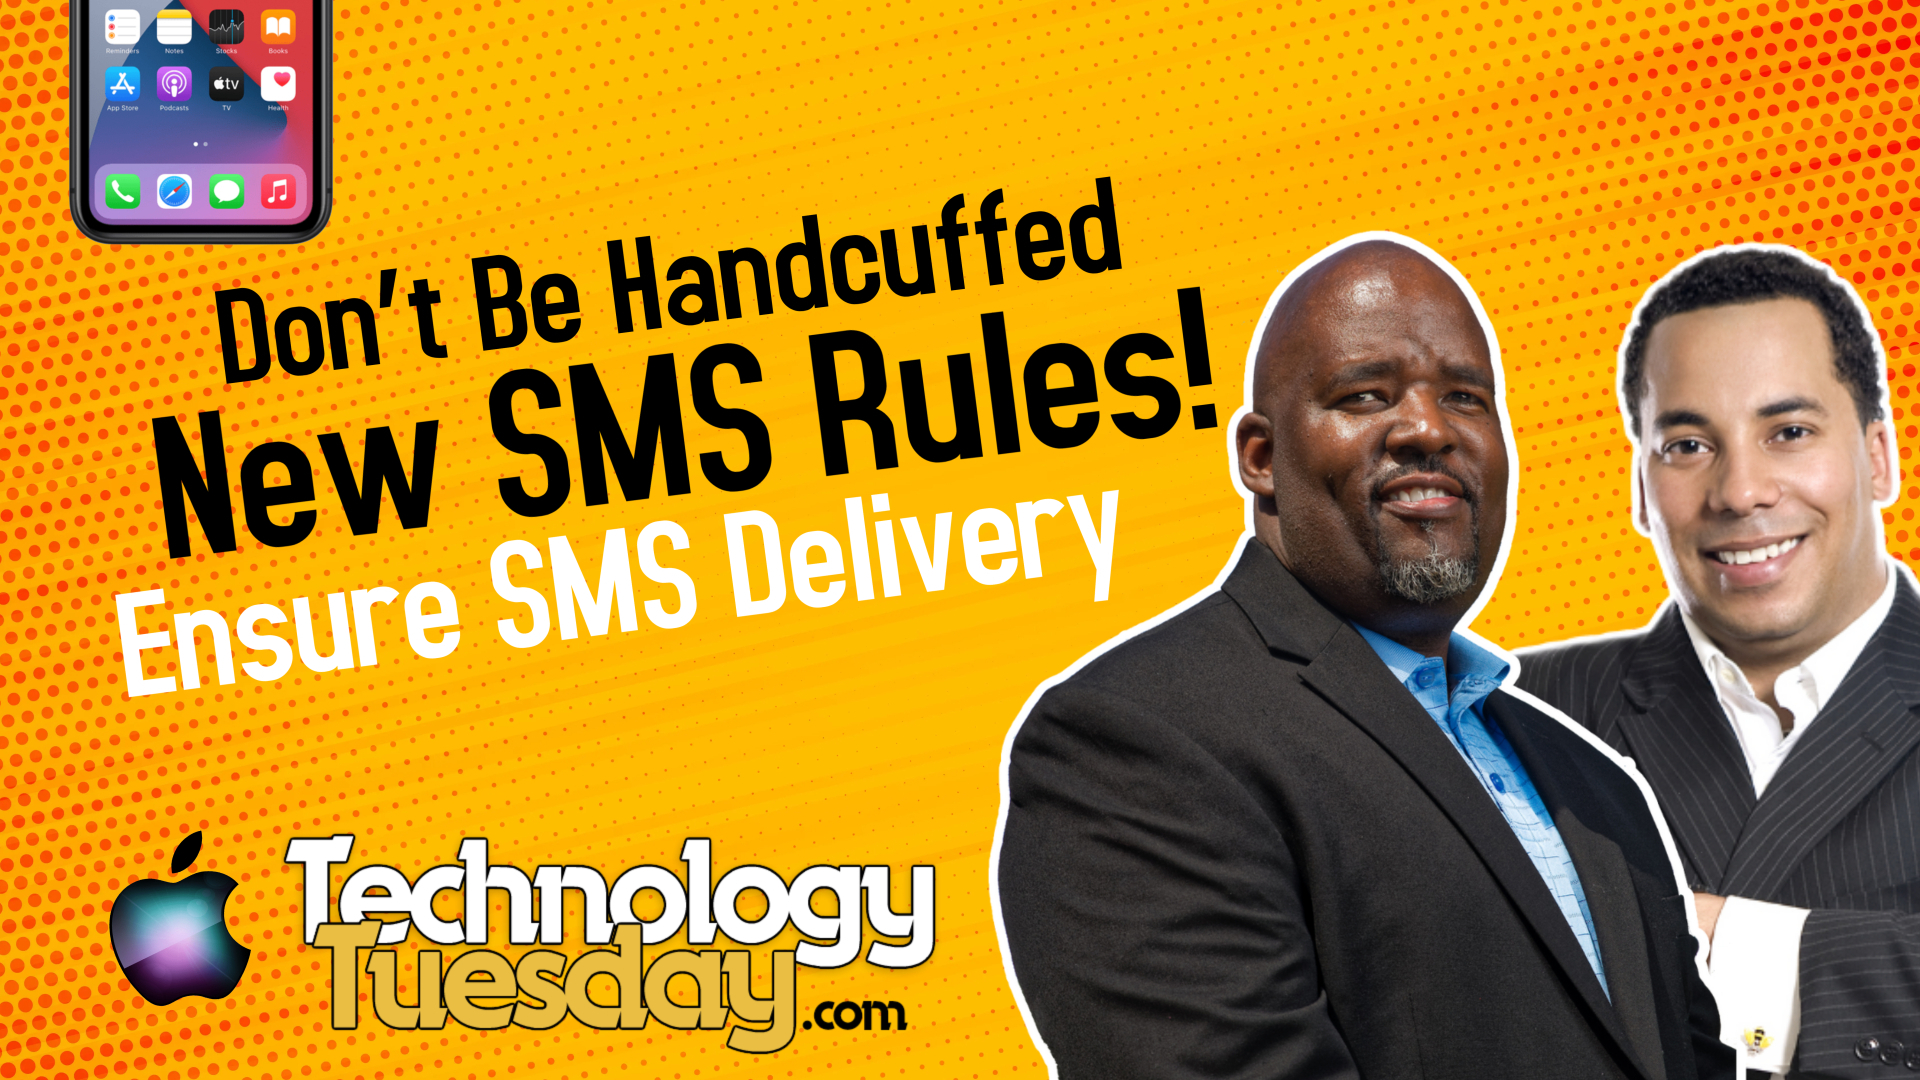 SMS Rules Regulations